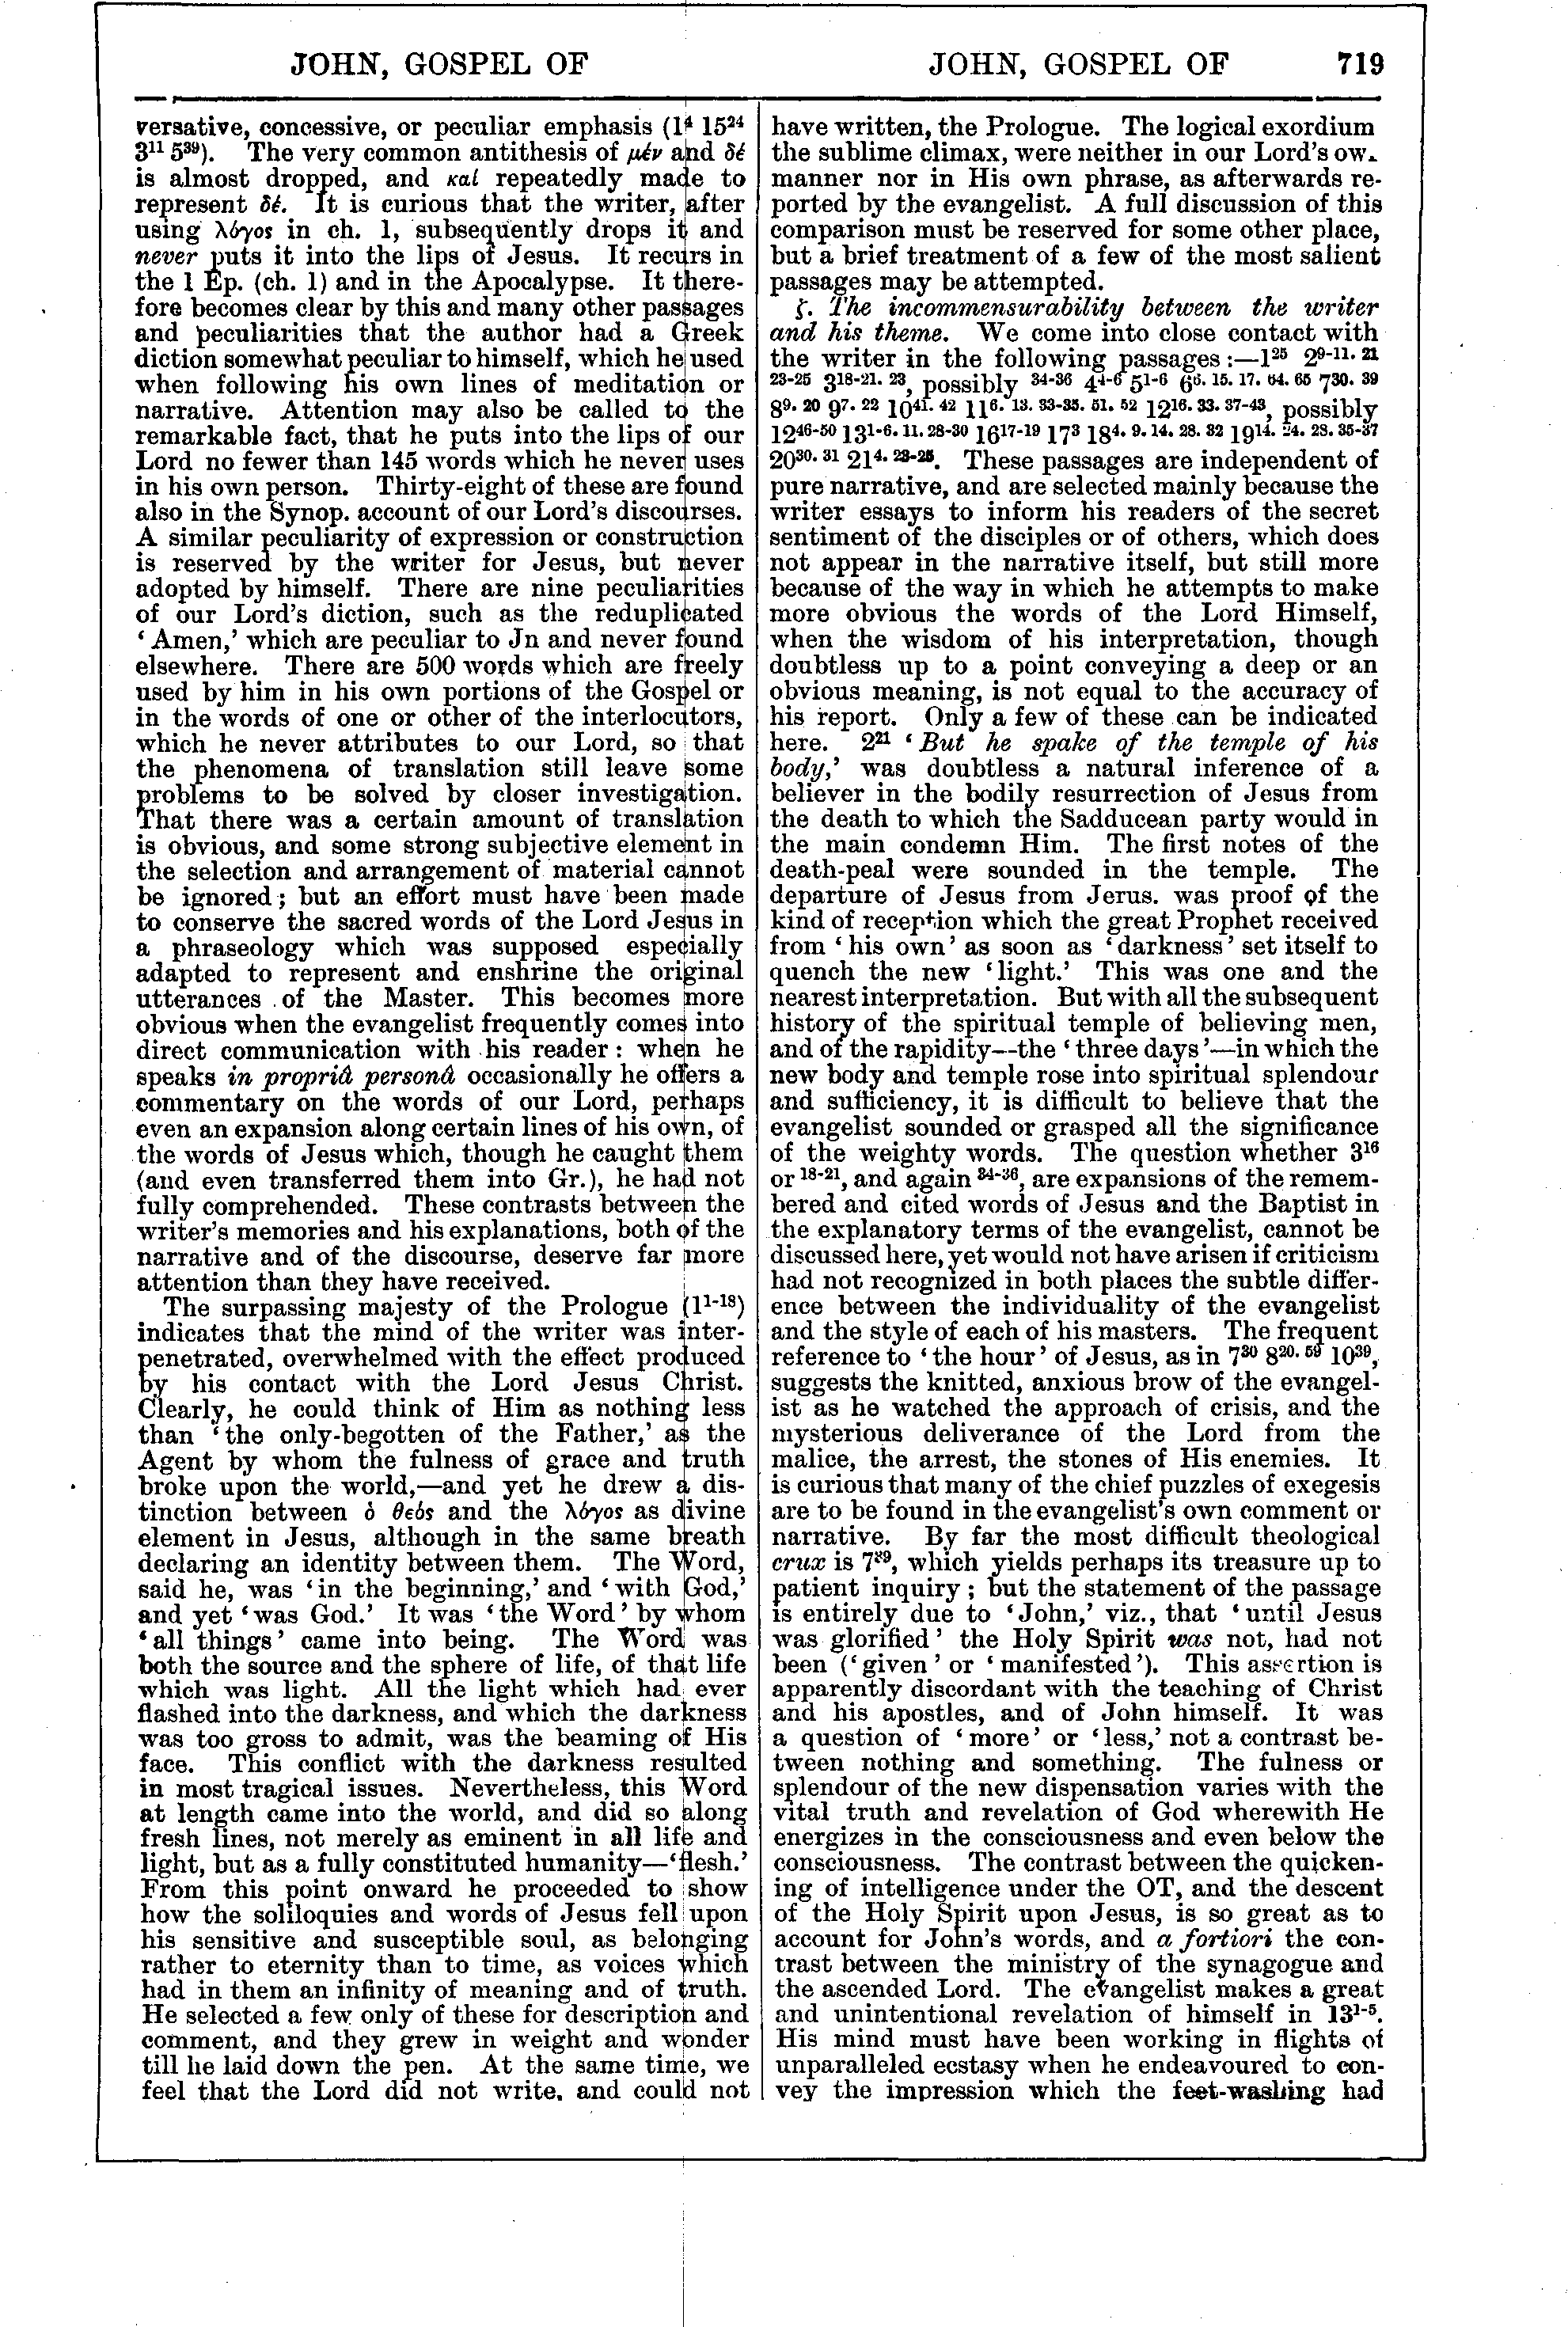 Image of page 719